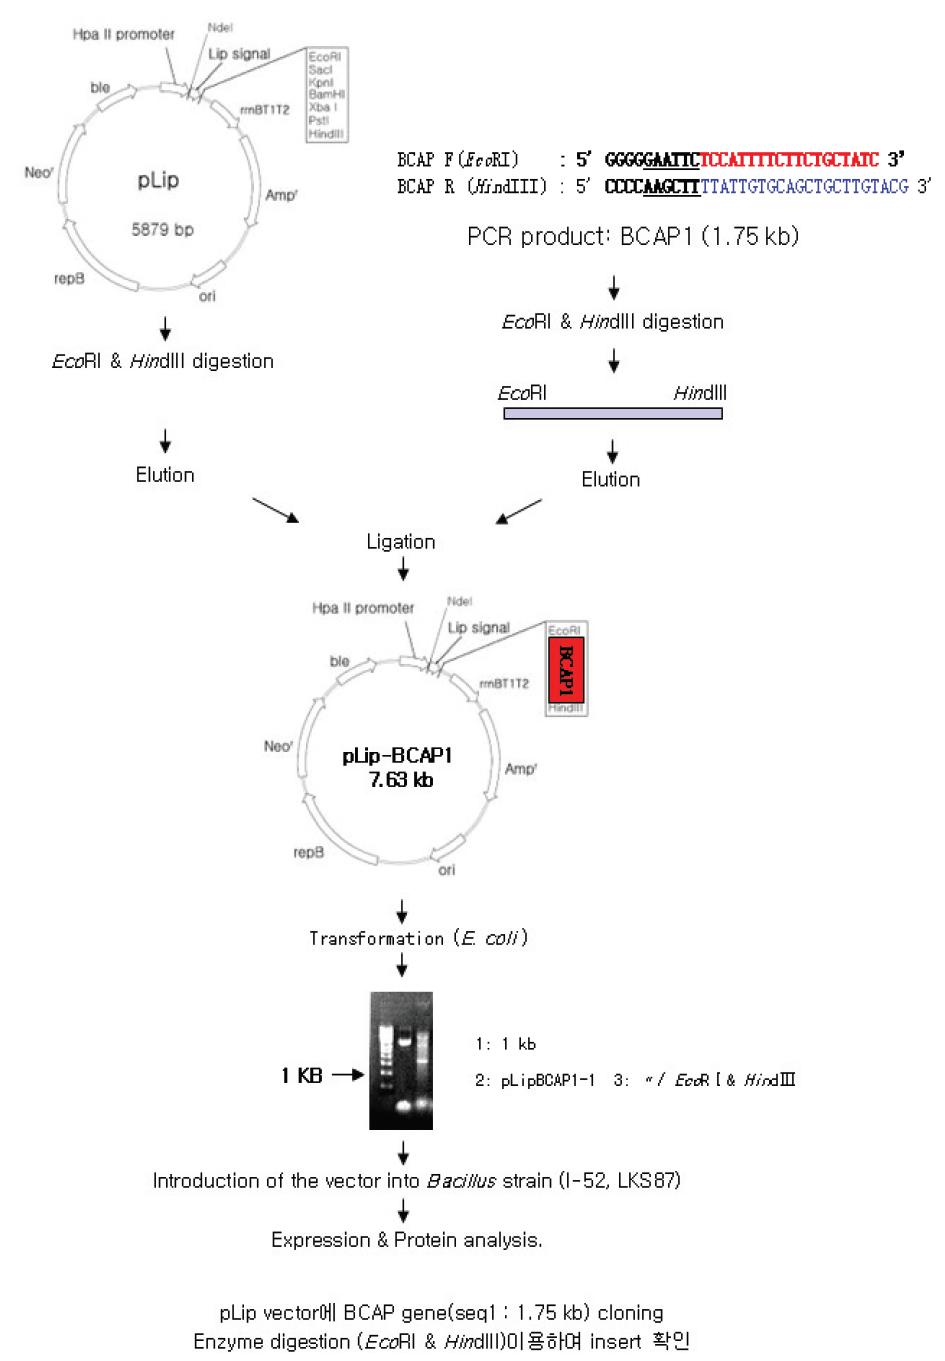 Cloning Strategy of the BCAP1 gene into conventional Bacillus vector, pLip.